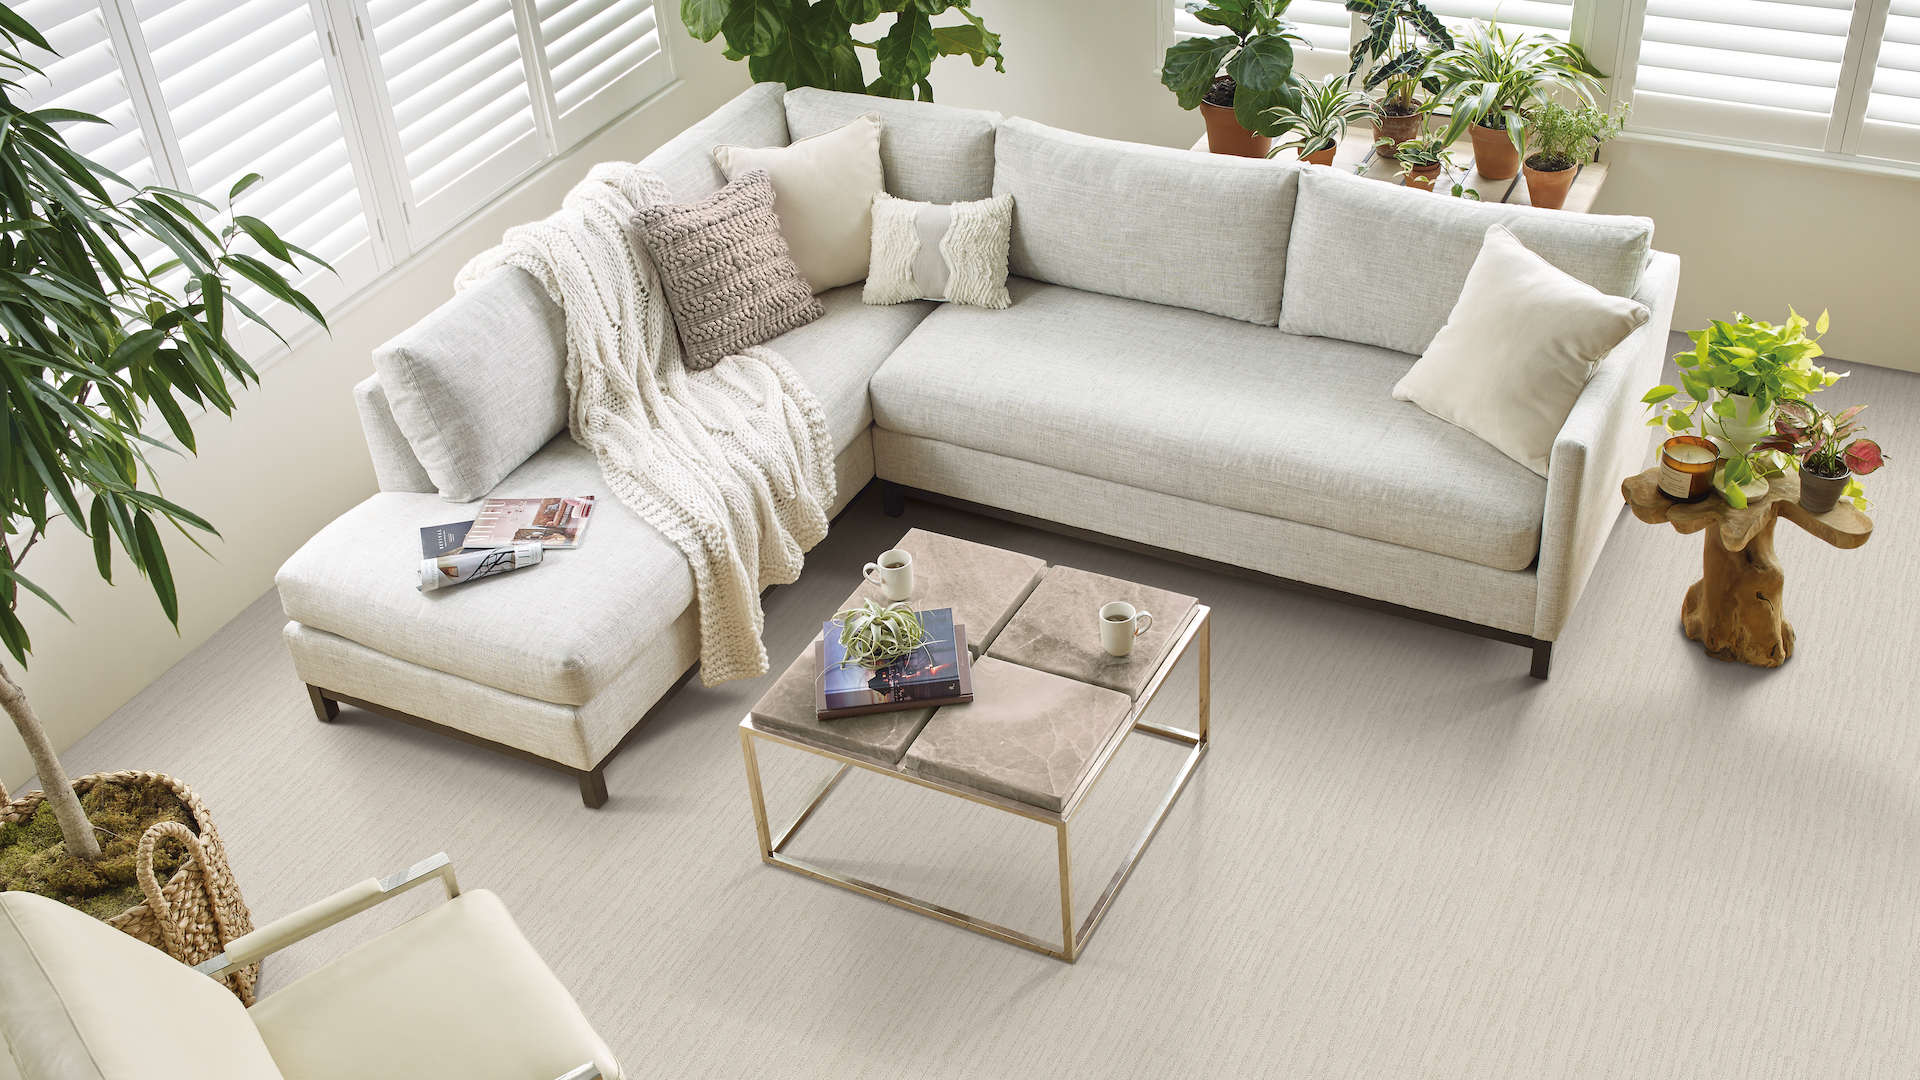 textured off white carpet in a neutral living room with plants